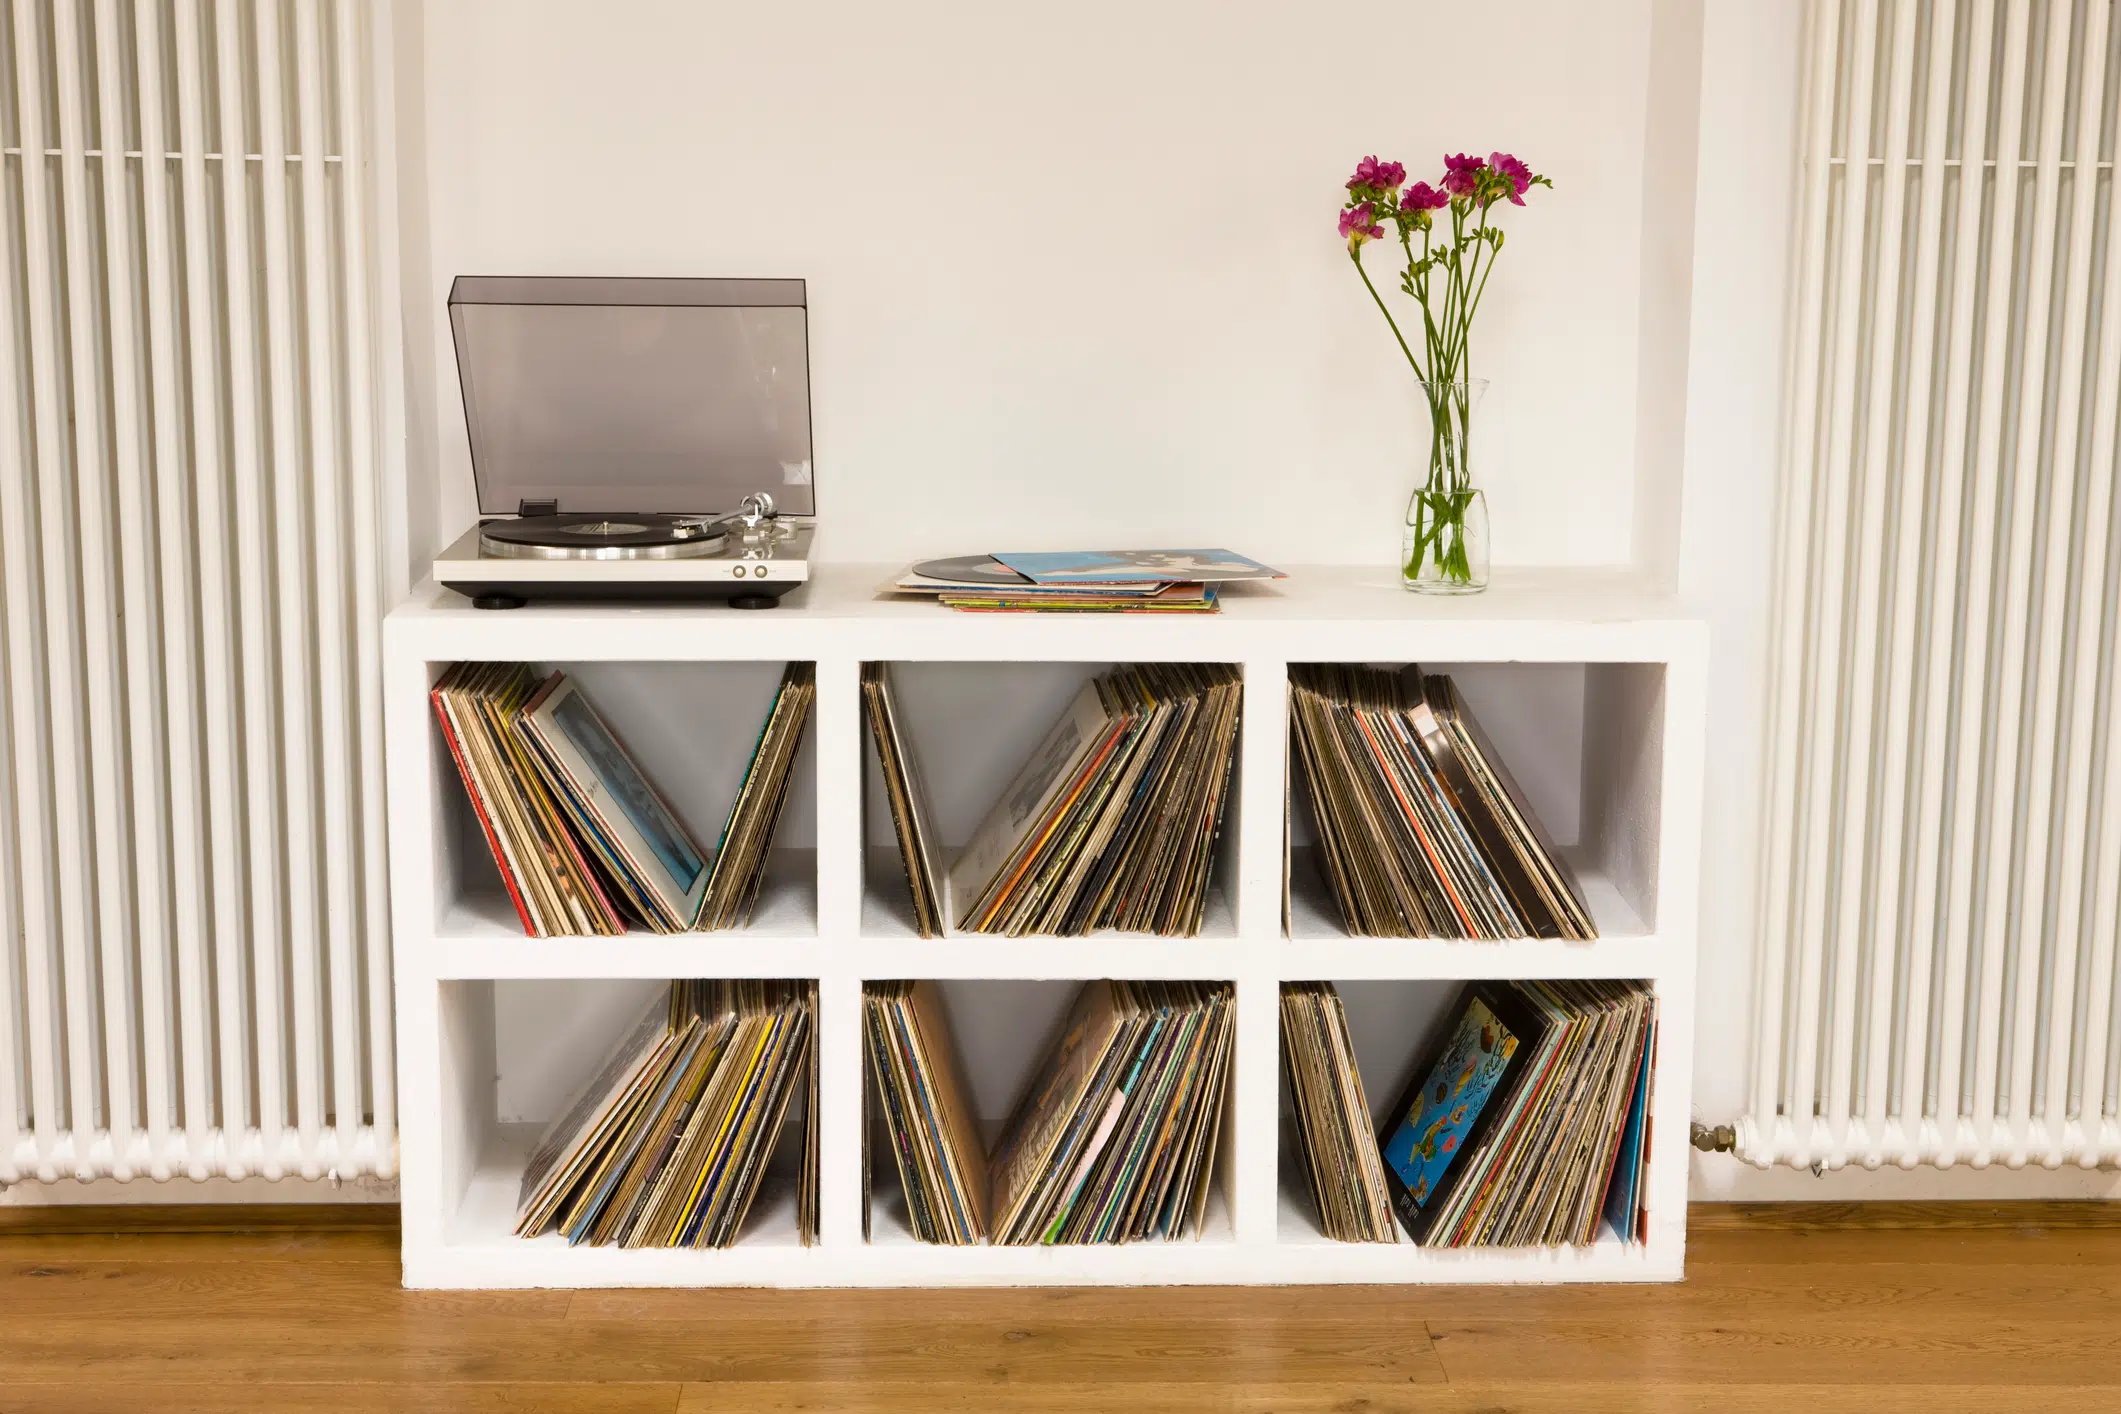 Let's Celebrate with National Vinyl Day ... 5 Vinyl Facts!